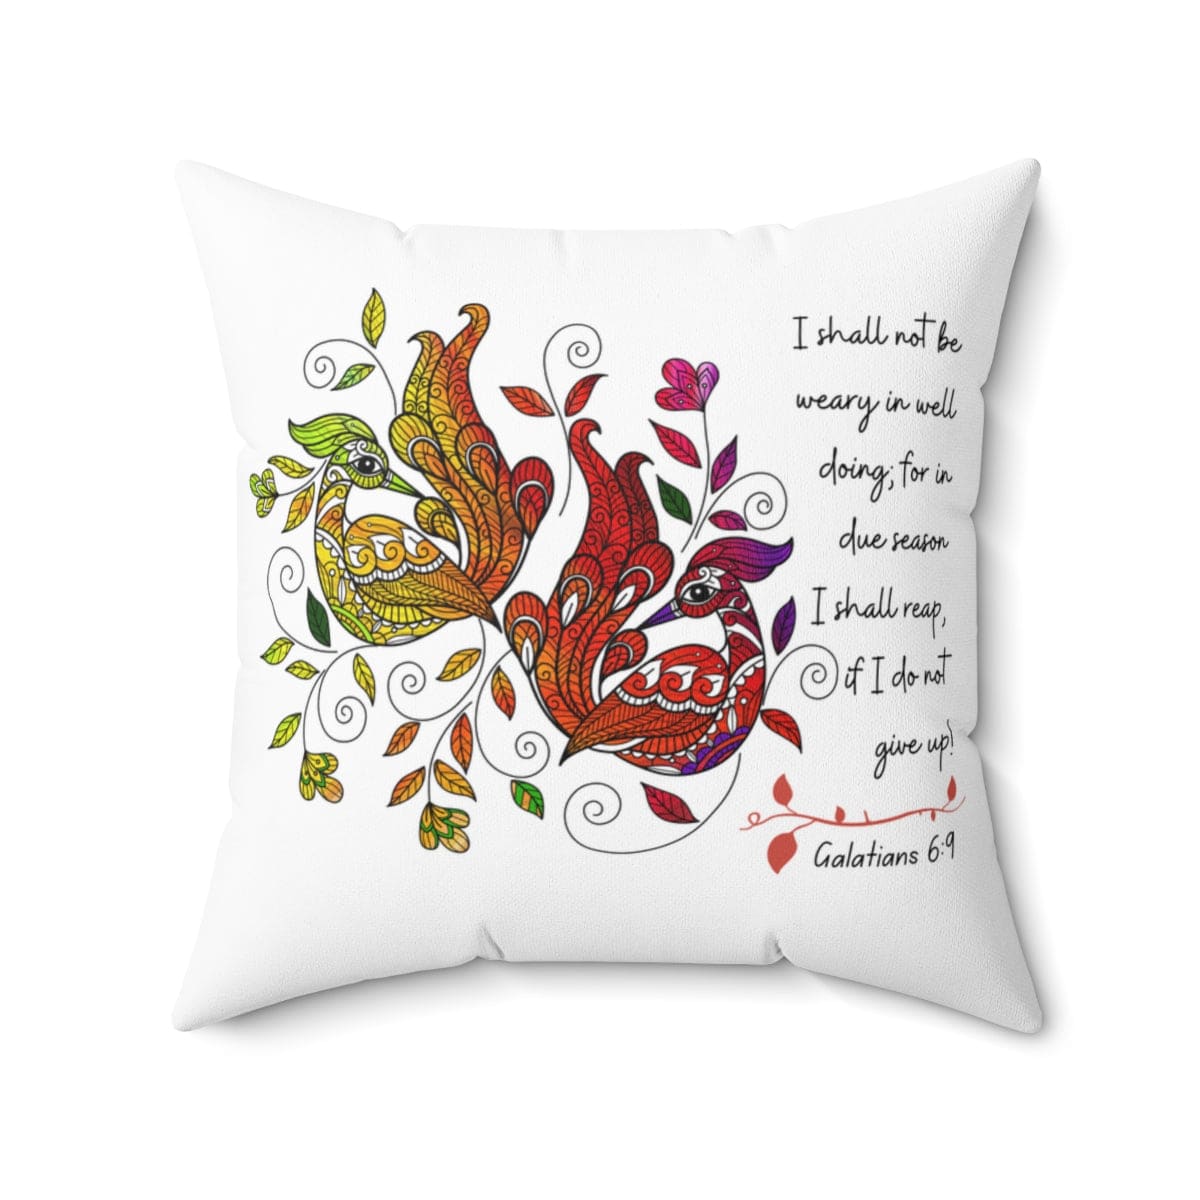 Decorative Throw Pillow Cover Colorful Peacock Print Affirmation - i Shall